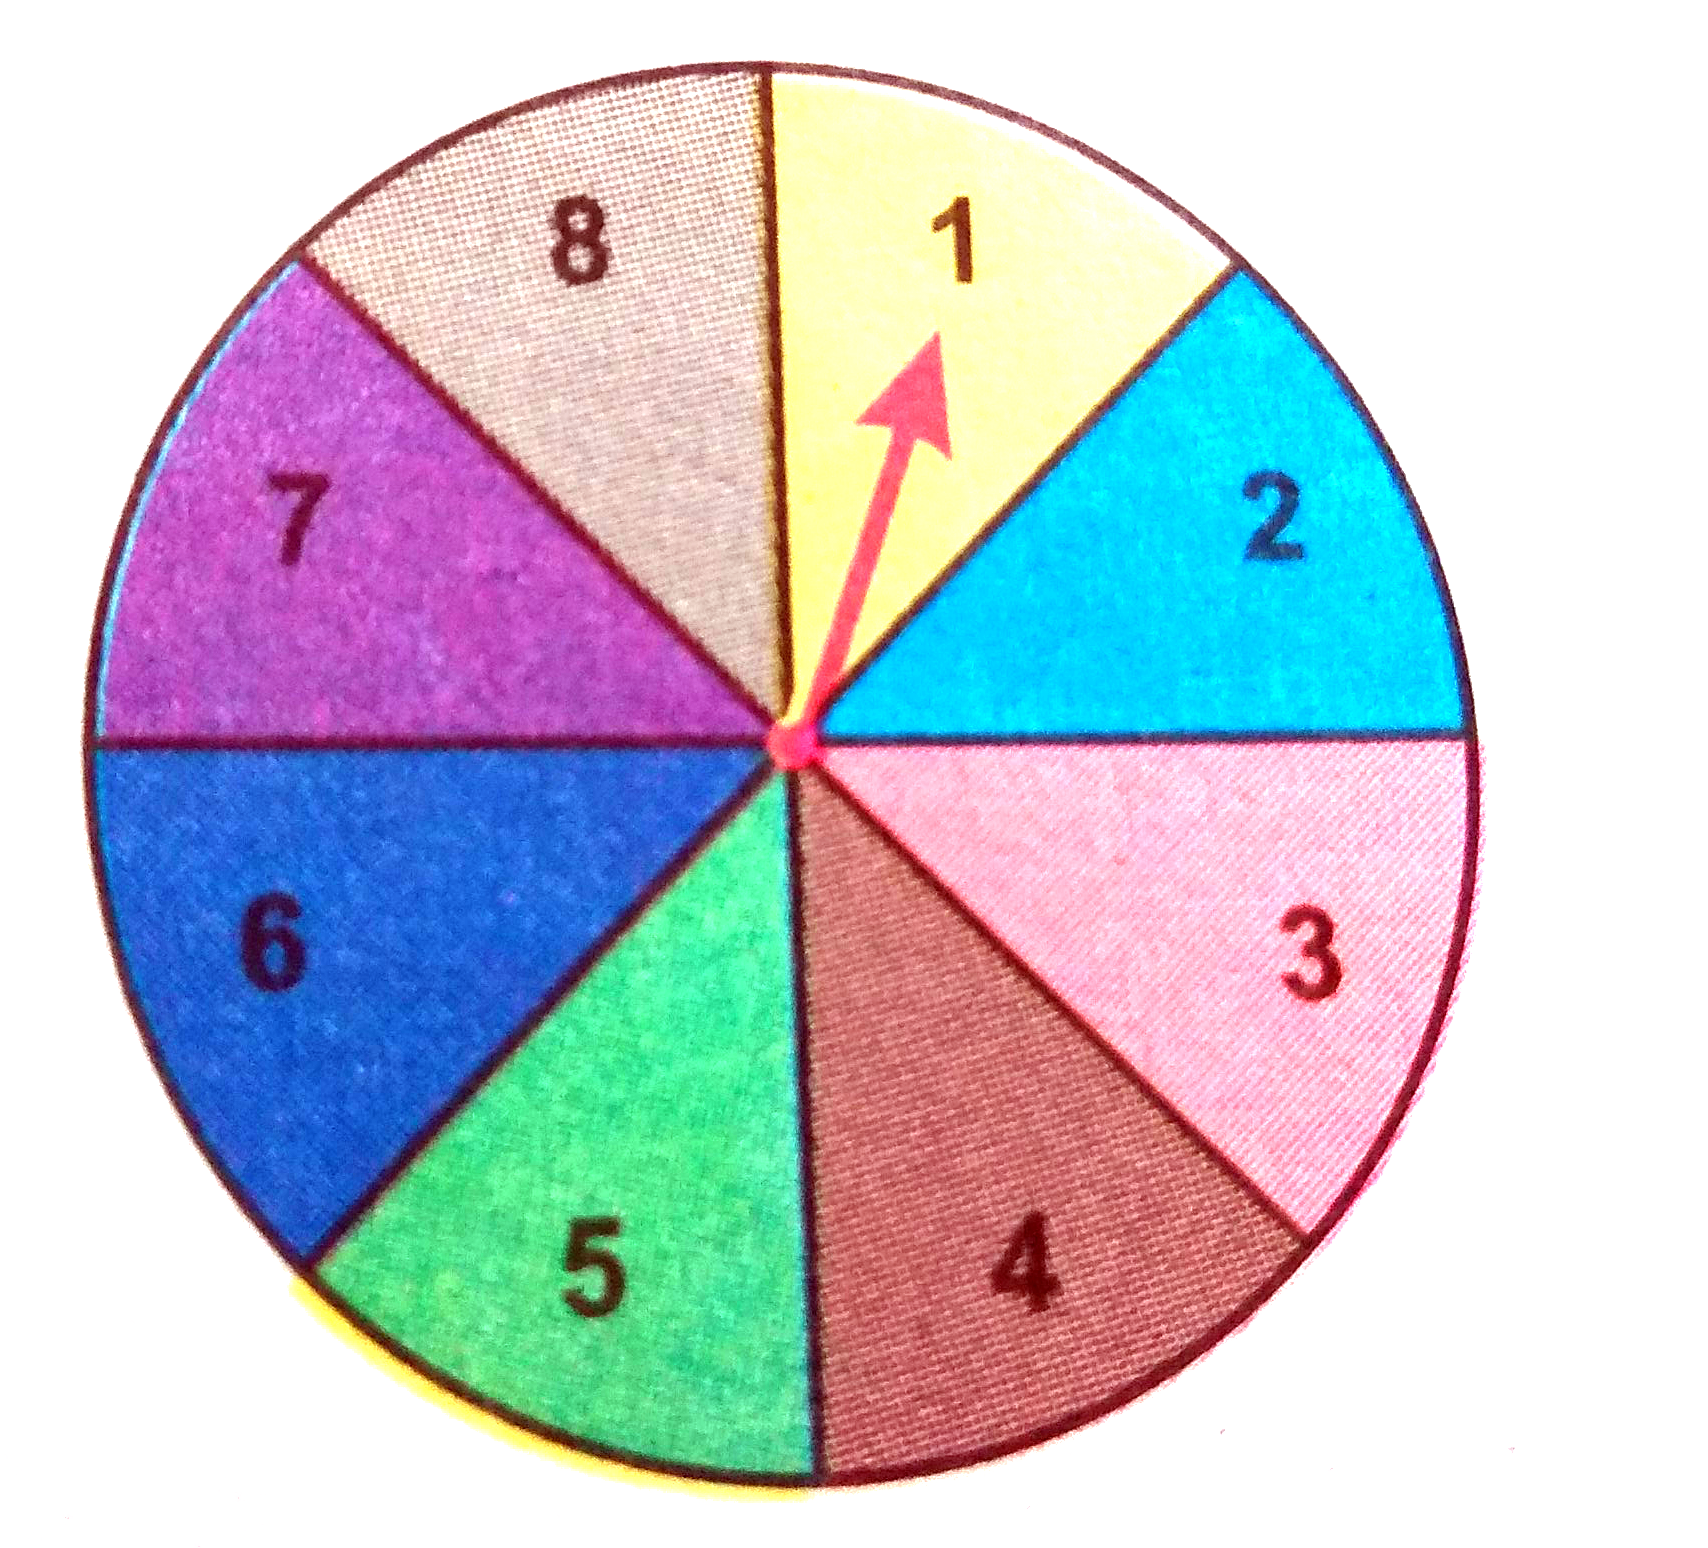 What is the probability that the spinner will not land on a multiple of 3 ?